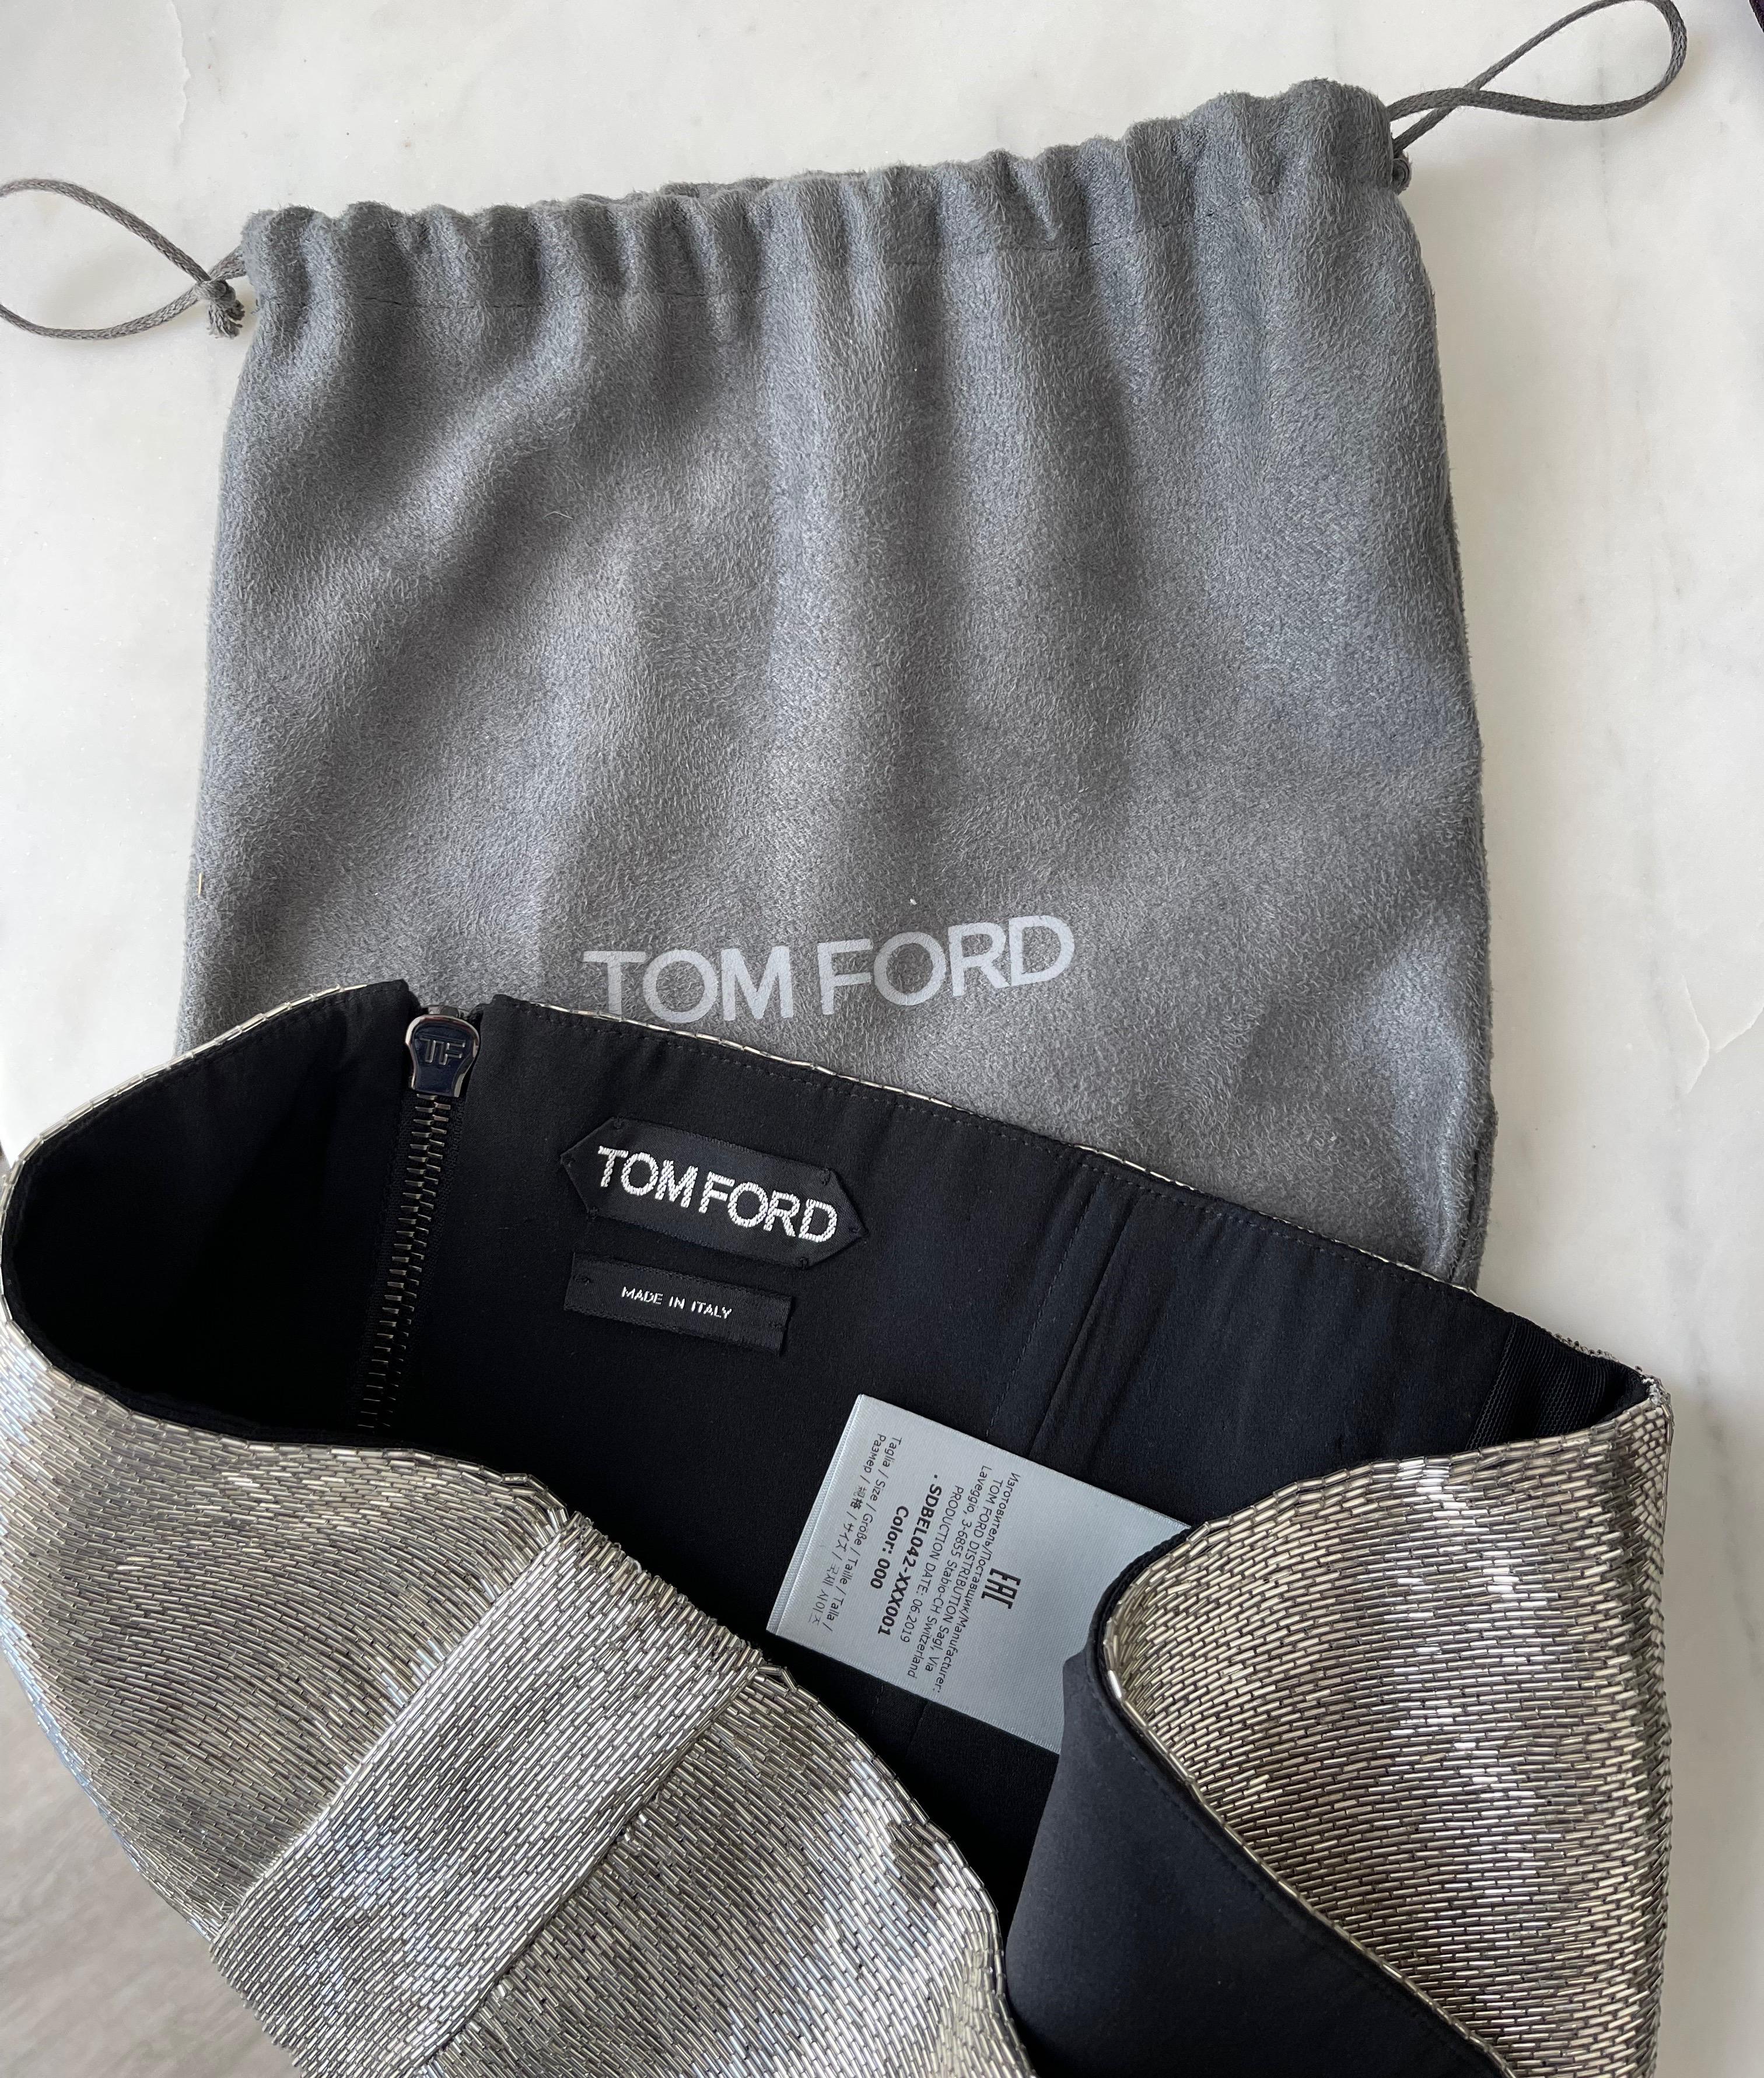 Brand new TOM FORD silver beaded metallic belt ! Bring any outfit to life with this rare beauty. Full metal zipper up the back. Comes with original Tom Ford pouch.
In great unworn condition
Made in Italy
Marked Size 44 / US 10
Measurements:
31 inch